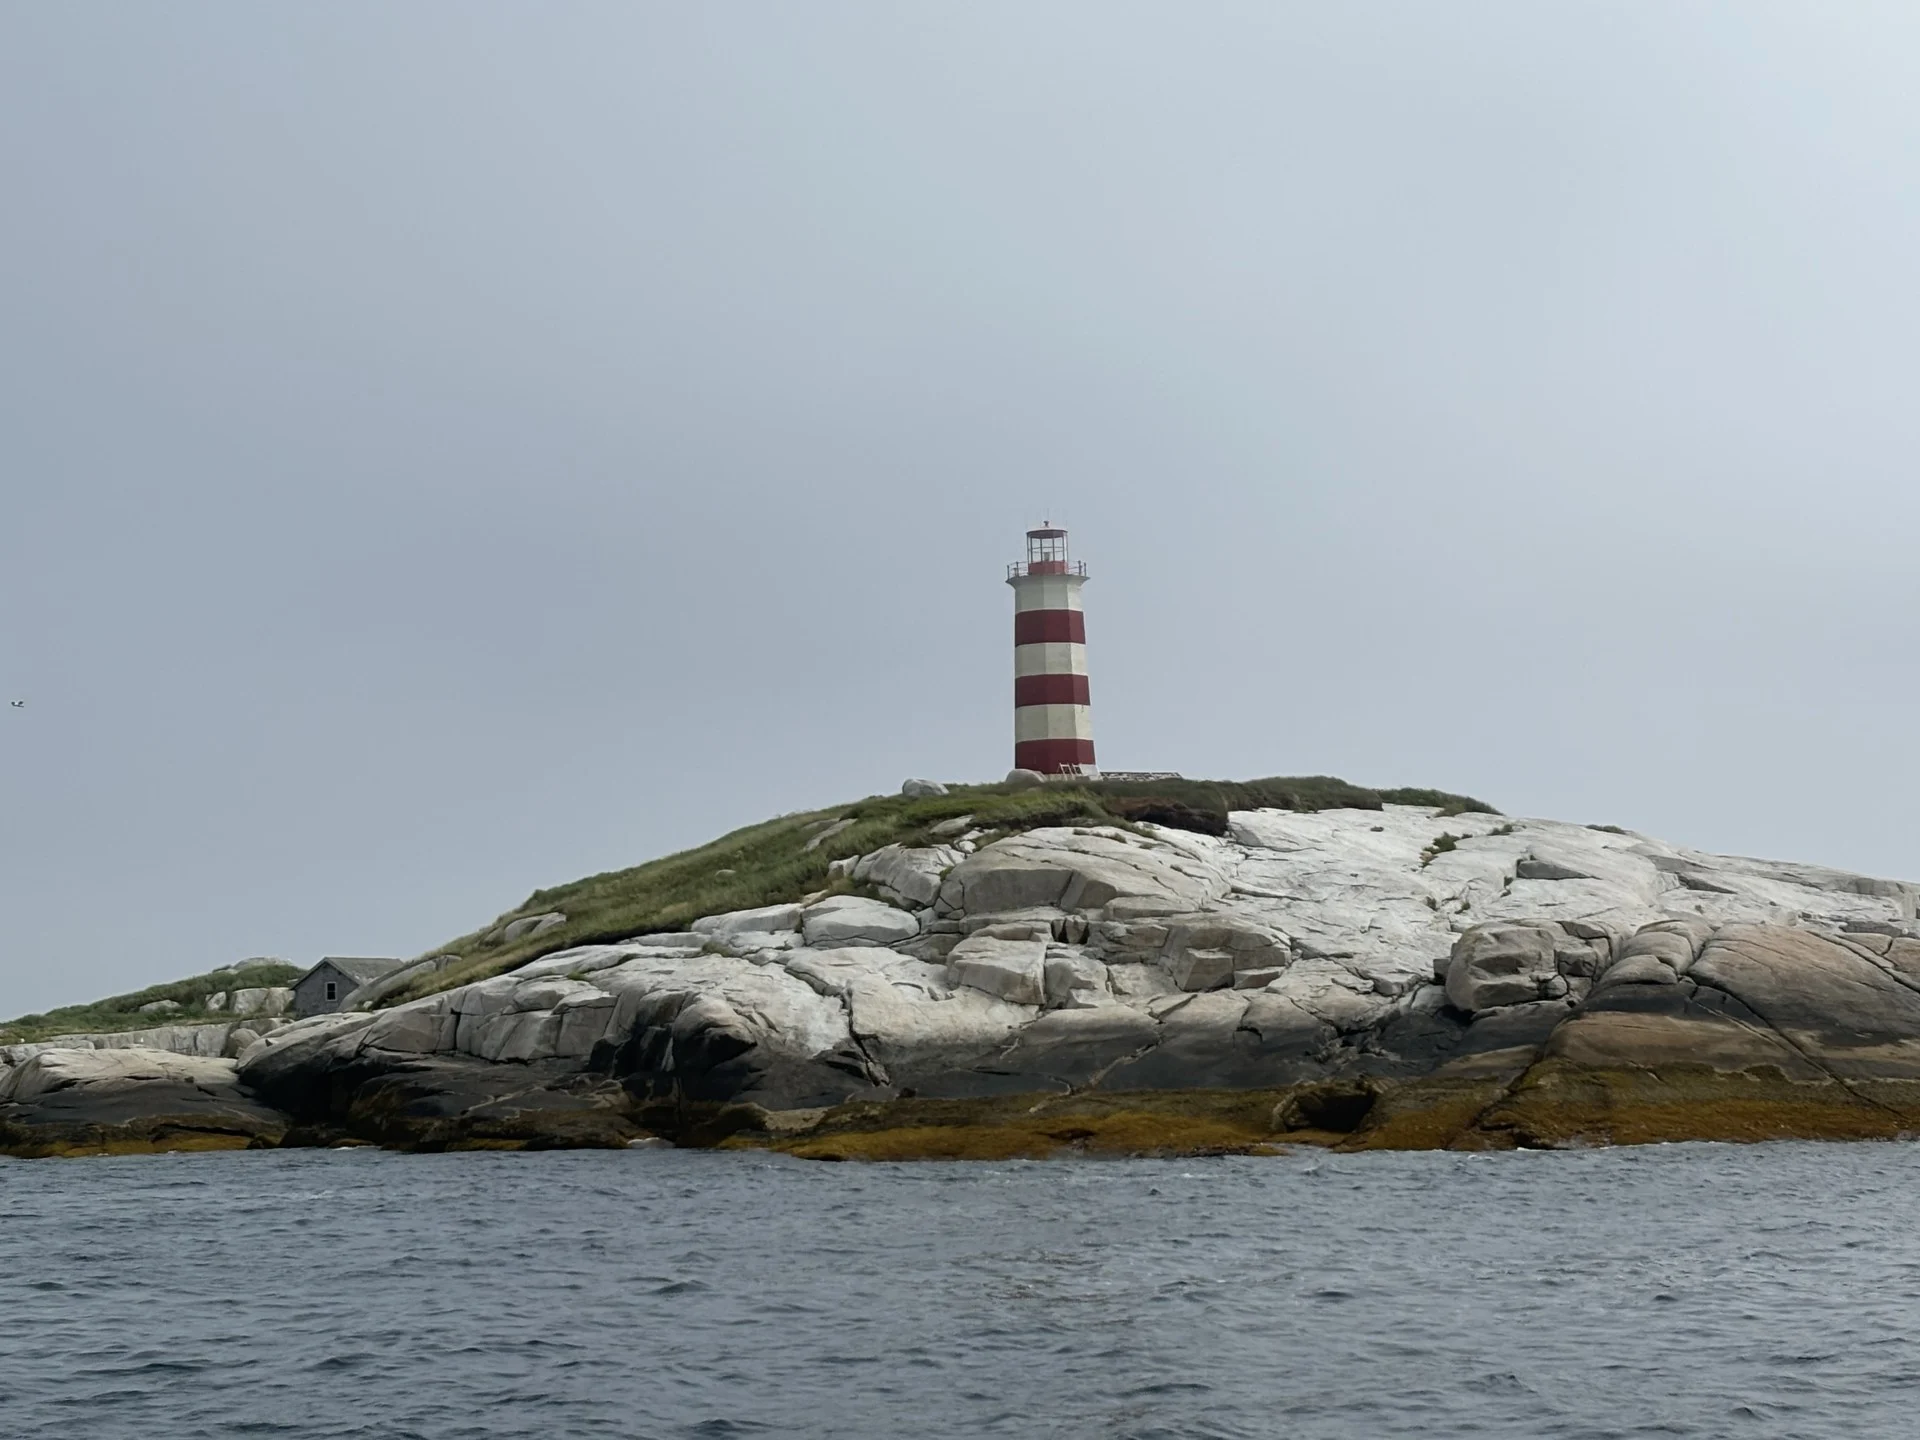 Canada's lighthouses: They saved us, now it's time we save them